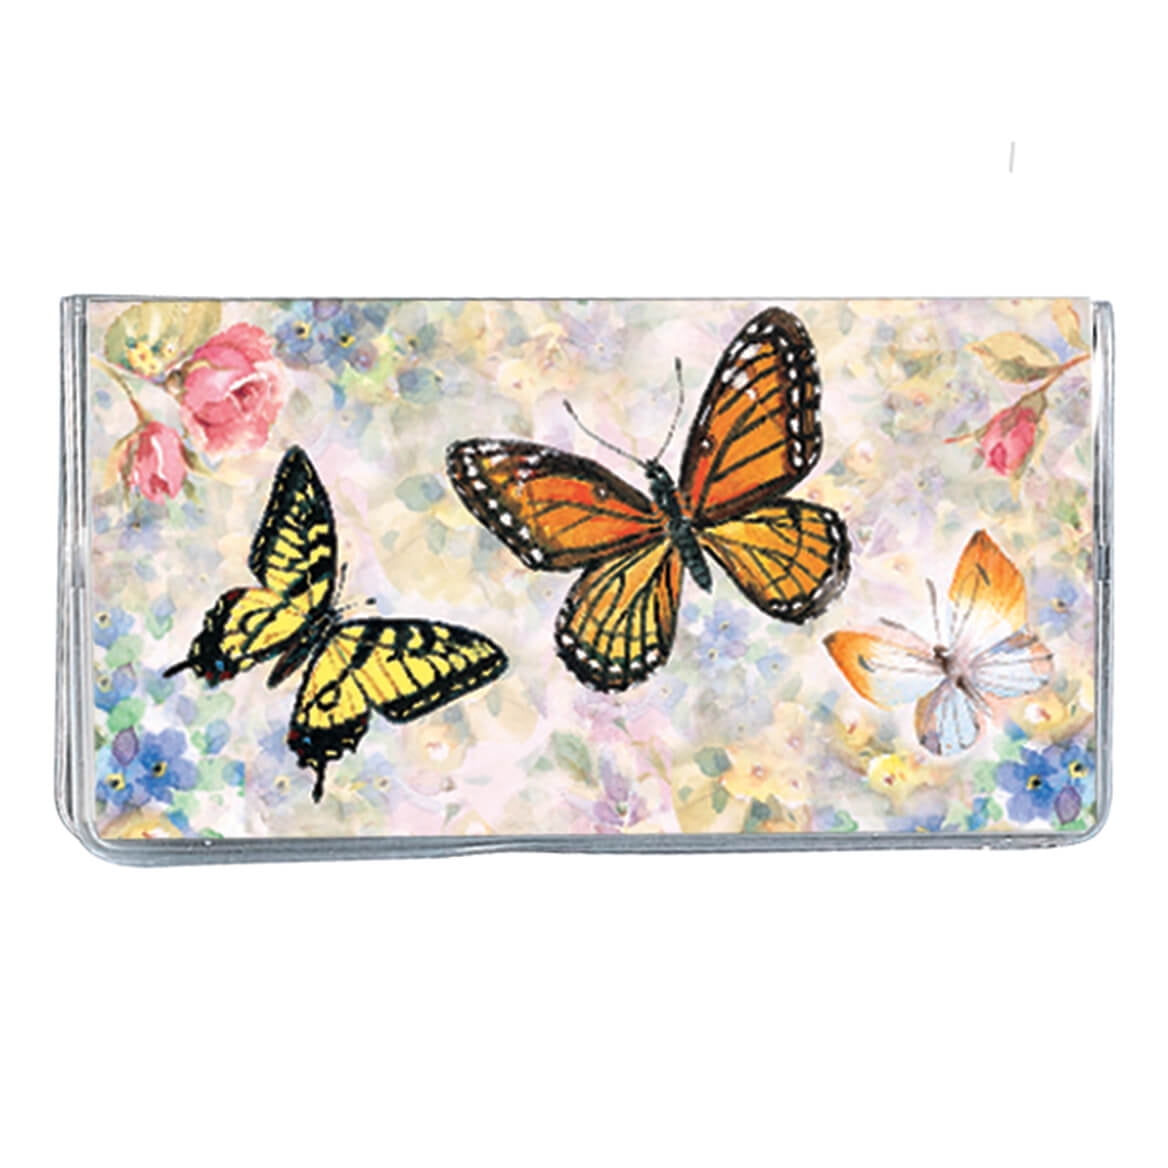 butterfly-two-year-planner-pocket-sized-calendar-ideal-for-purses-briefcases-or-backpacks